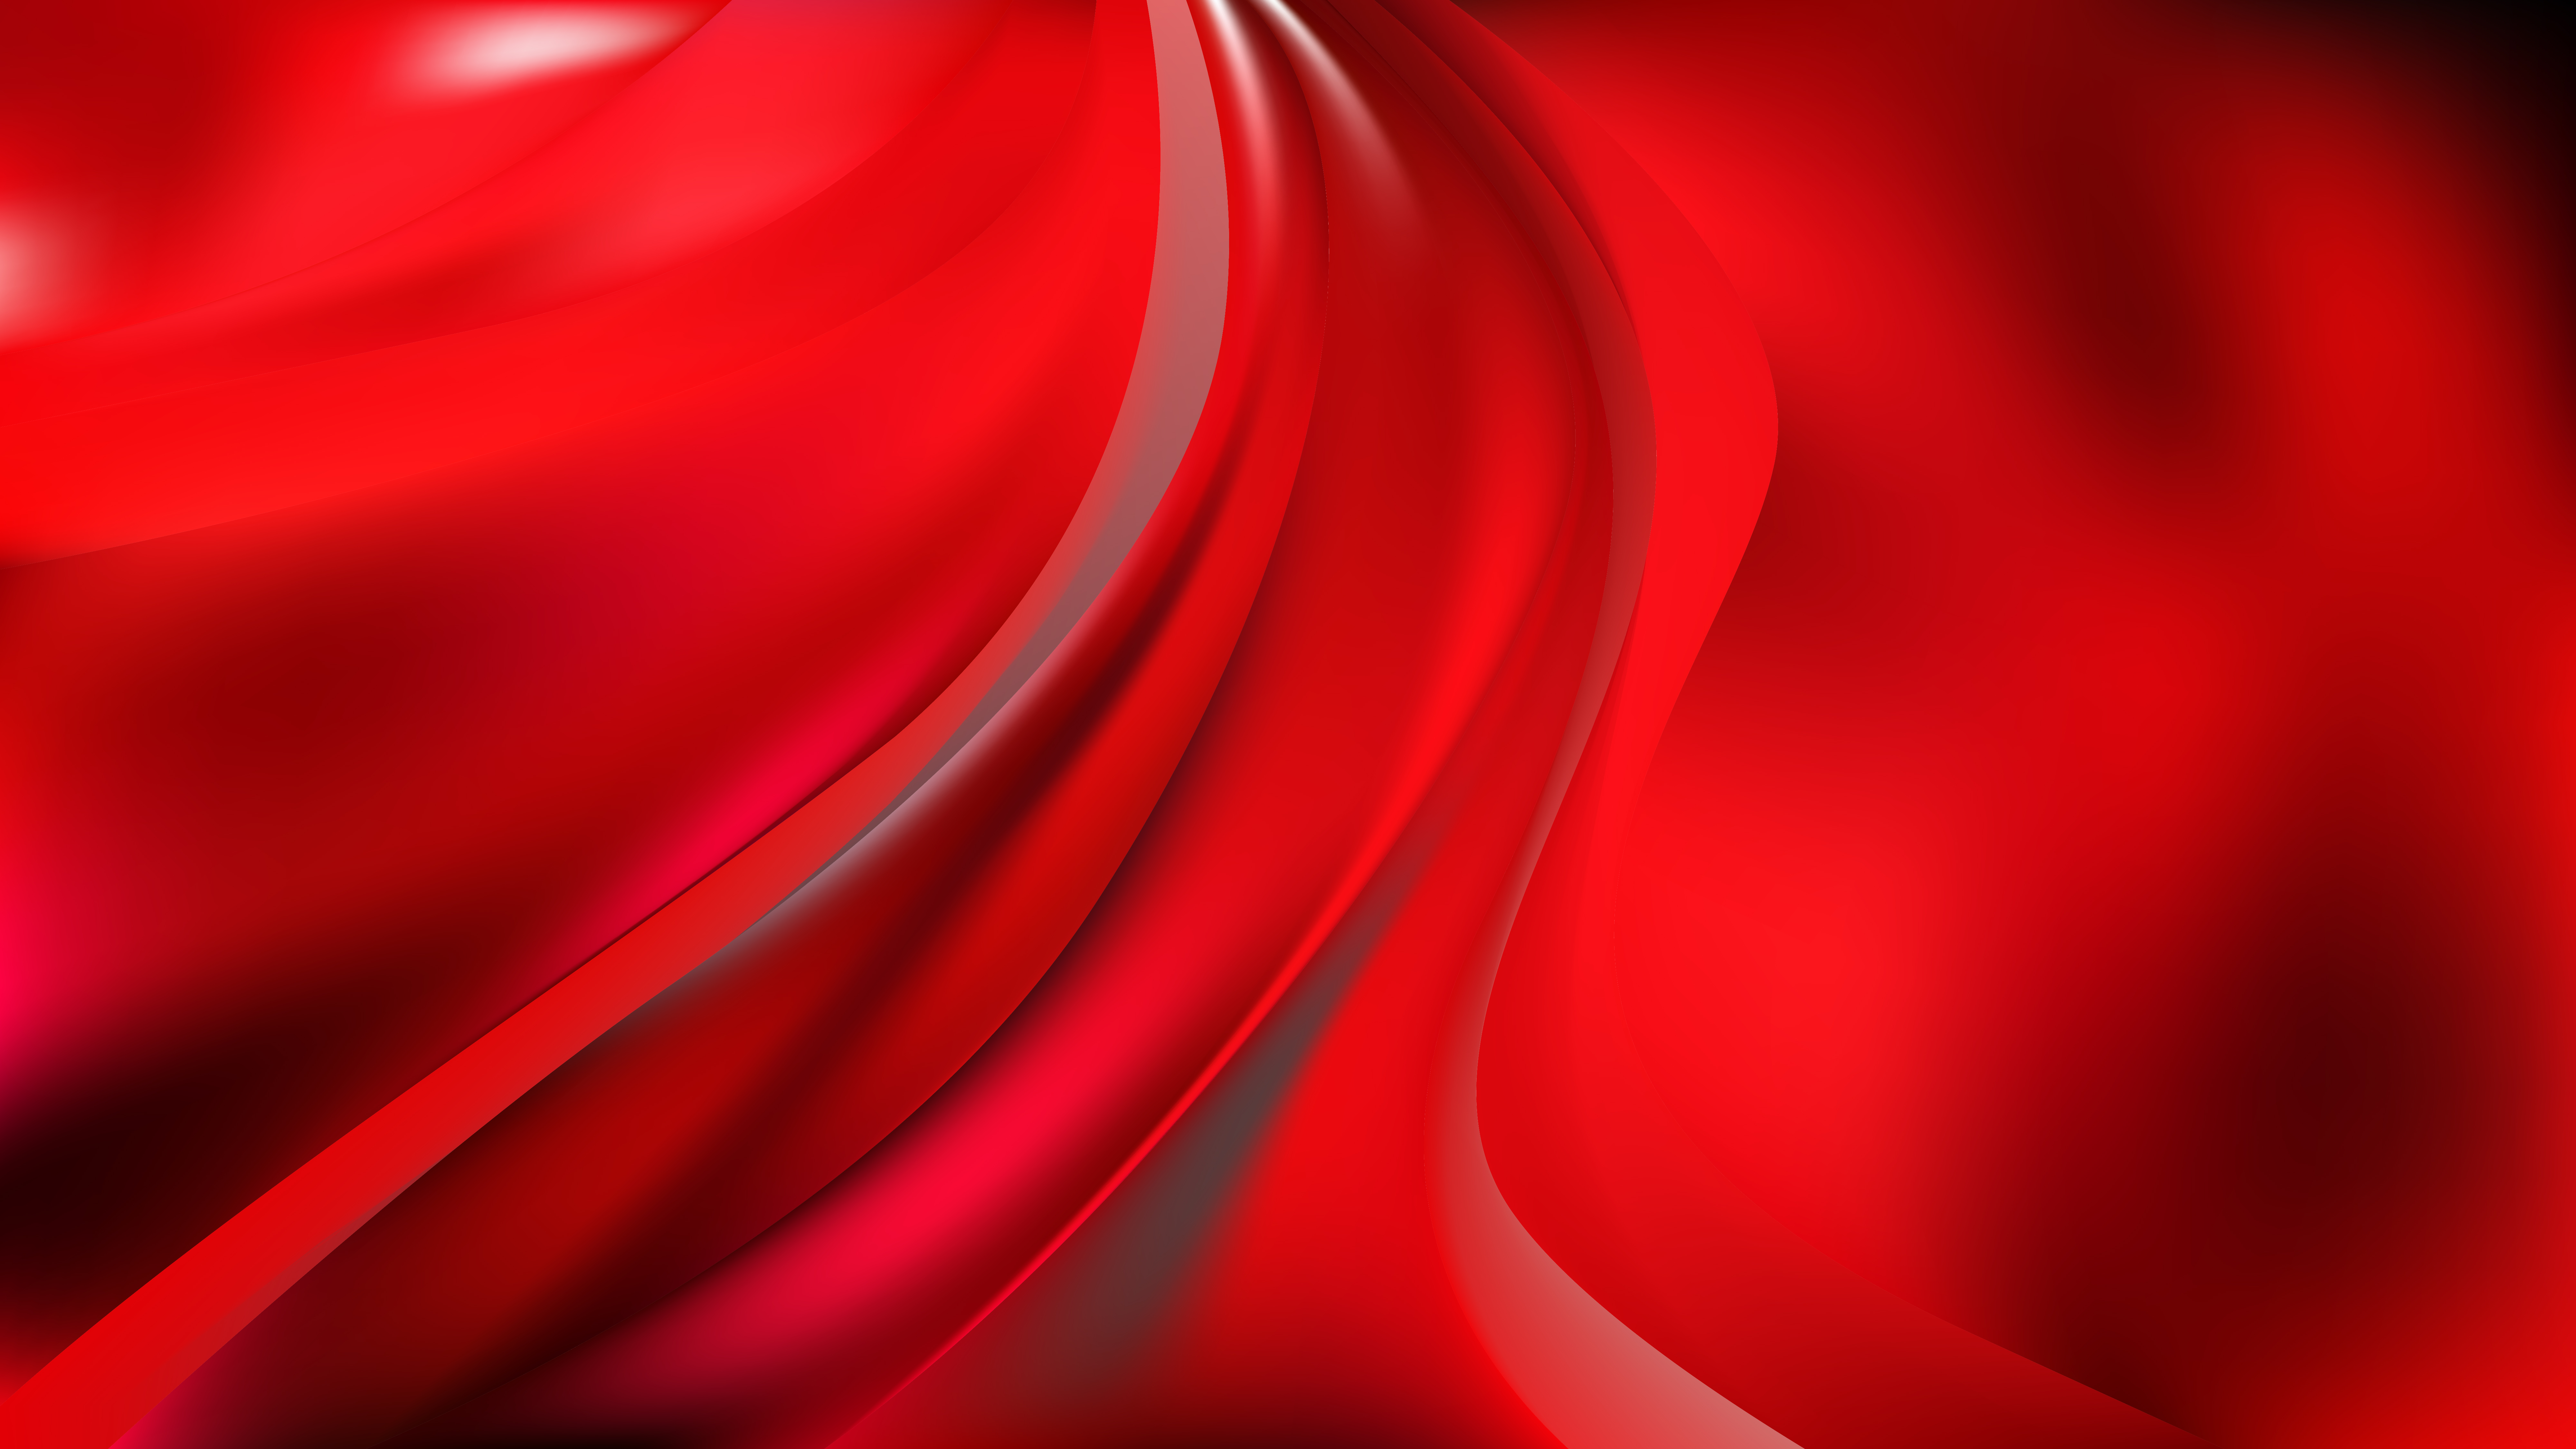 Free Abstract Dark Red Curve Background Vector Art